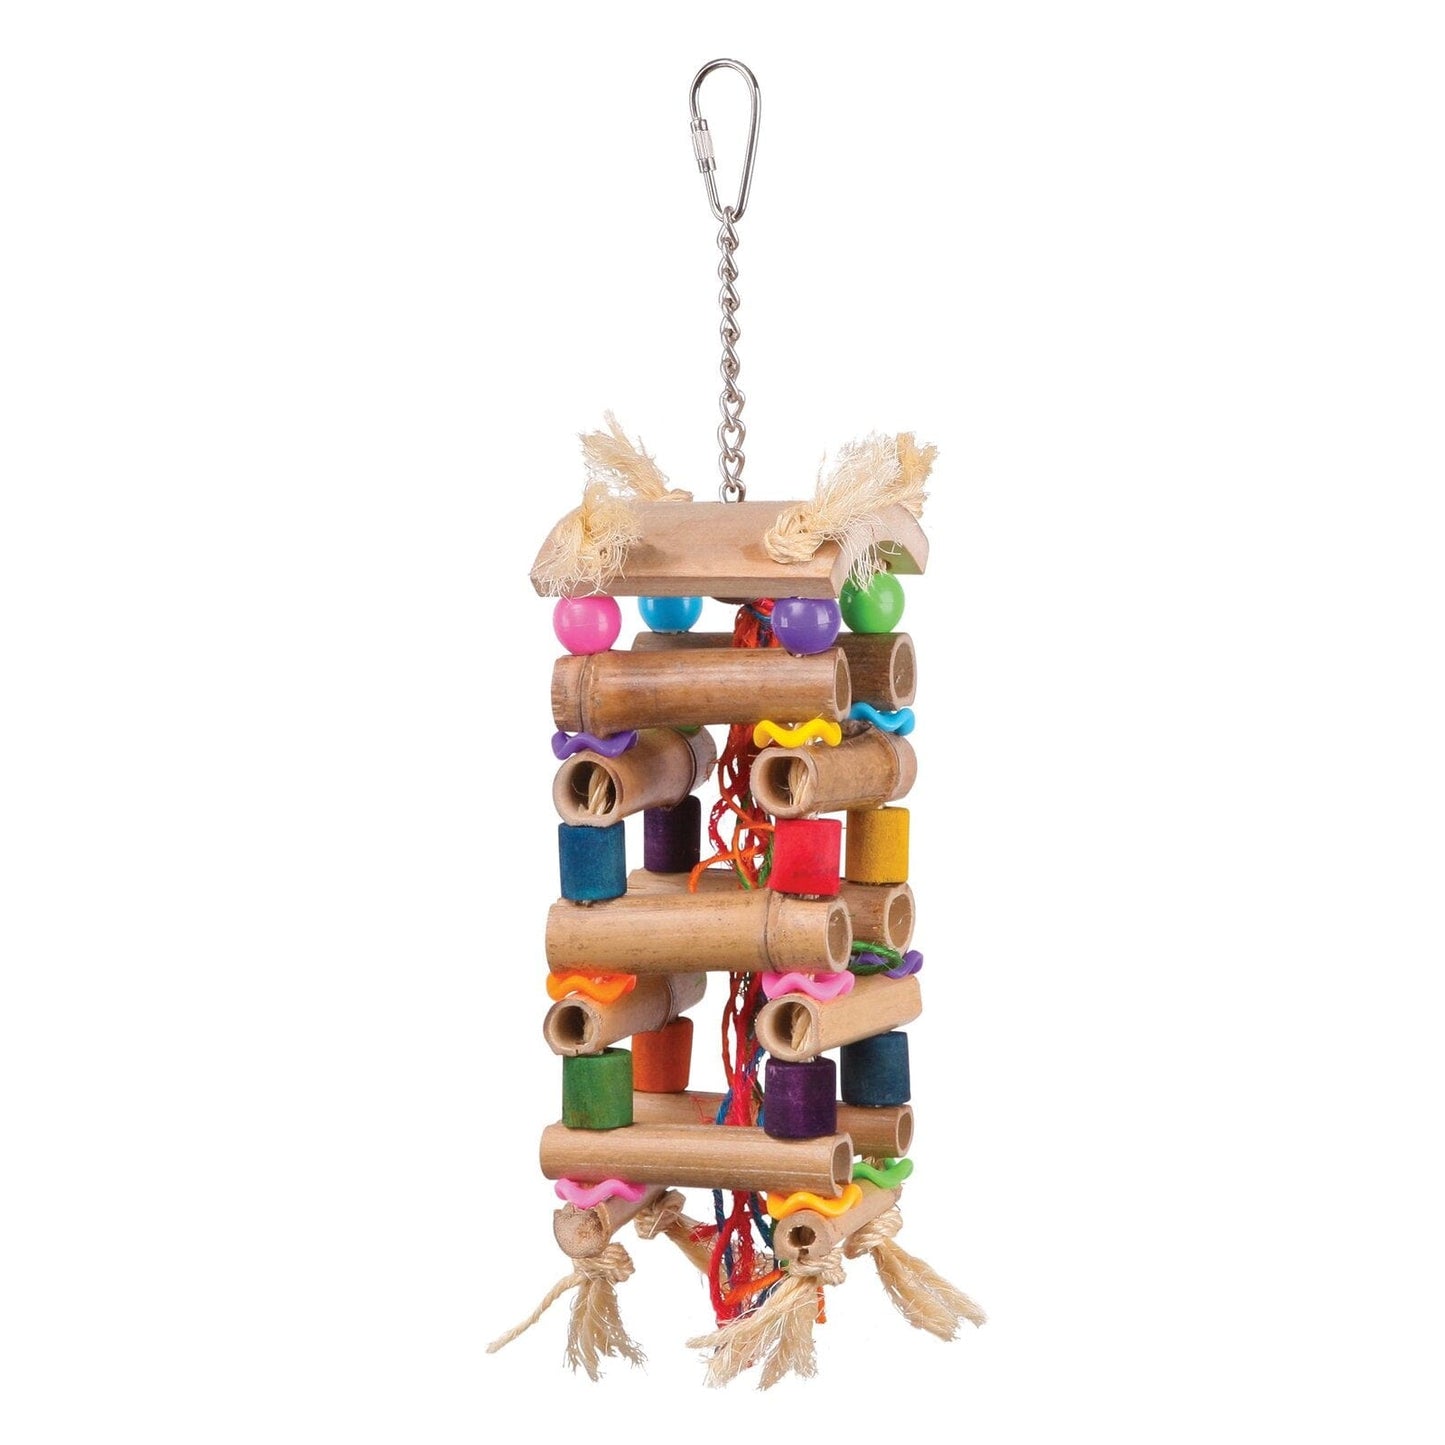 Kazoo Tower Toy with Sisal & Beads from Kazoo Pet Co